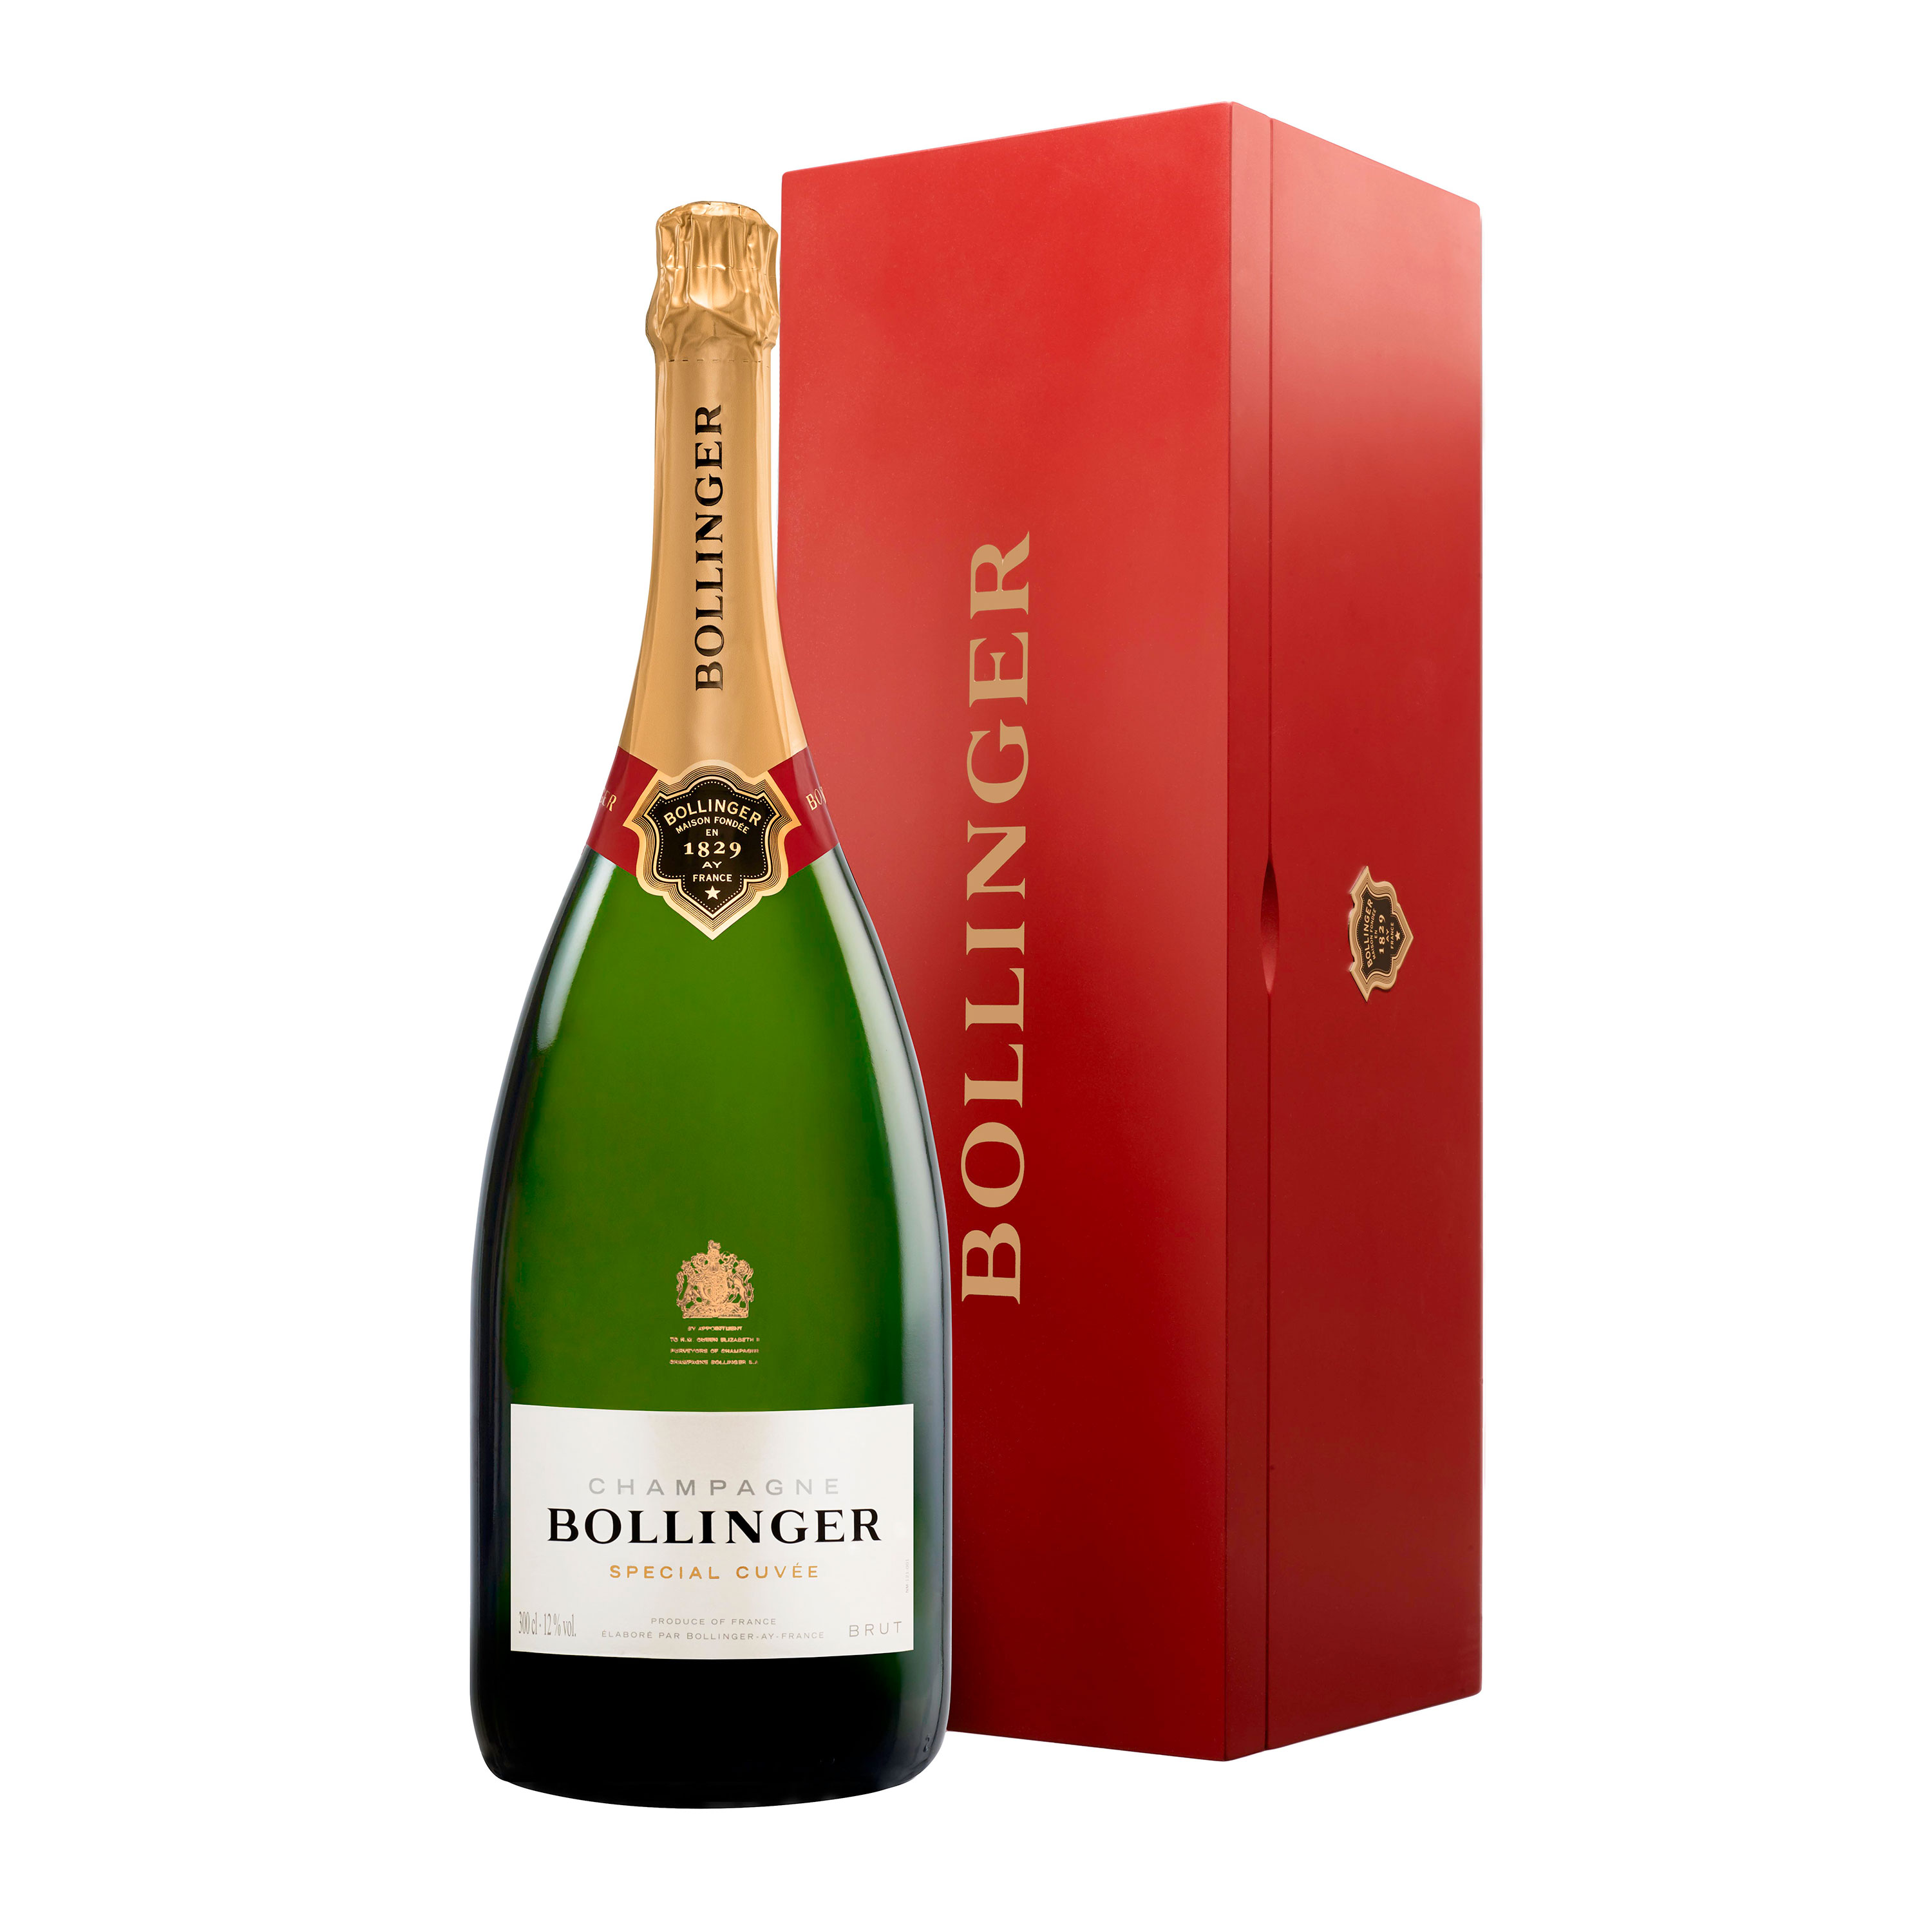 Buy Jeroboam of Bollinger Special Cuvee, NV, Champagne